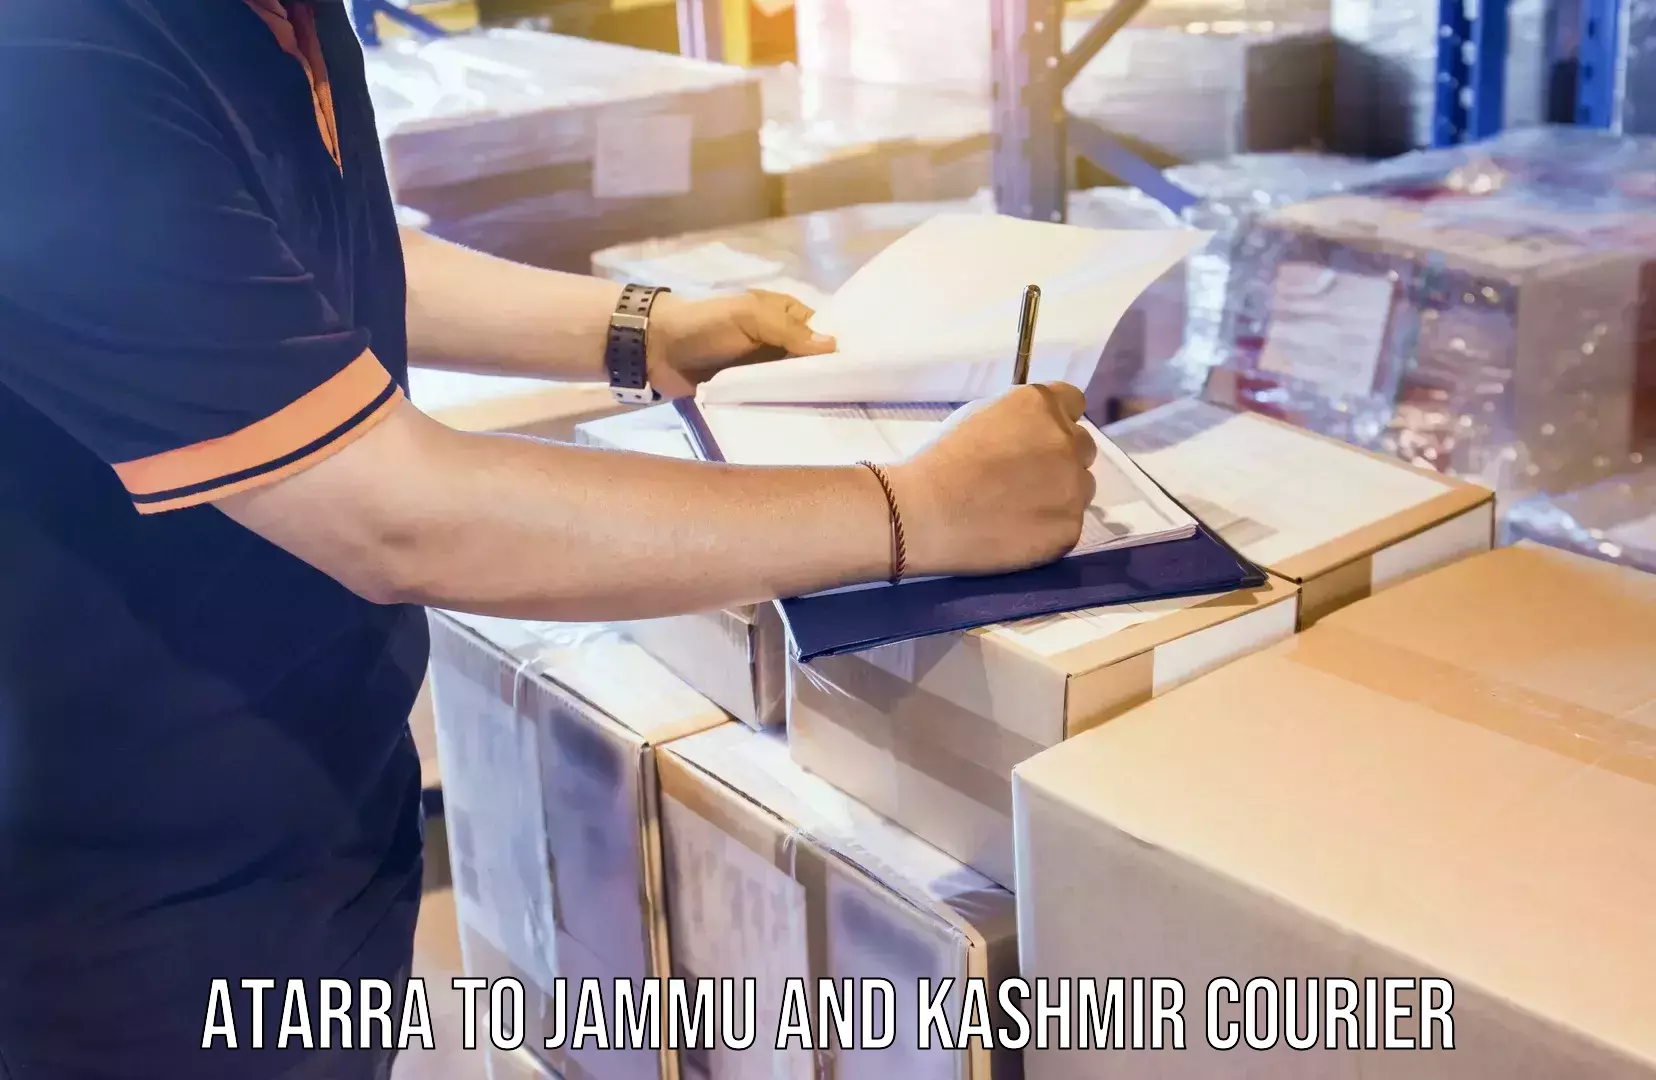 Courier service efficiency Atarra to Jammu and Kashmir